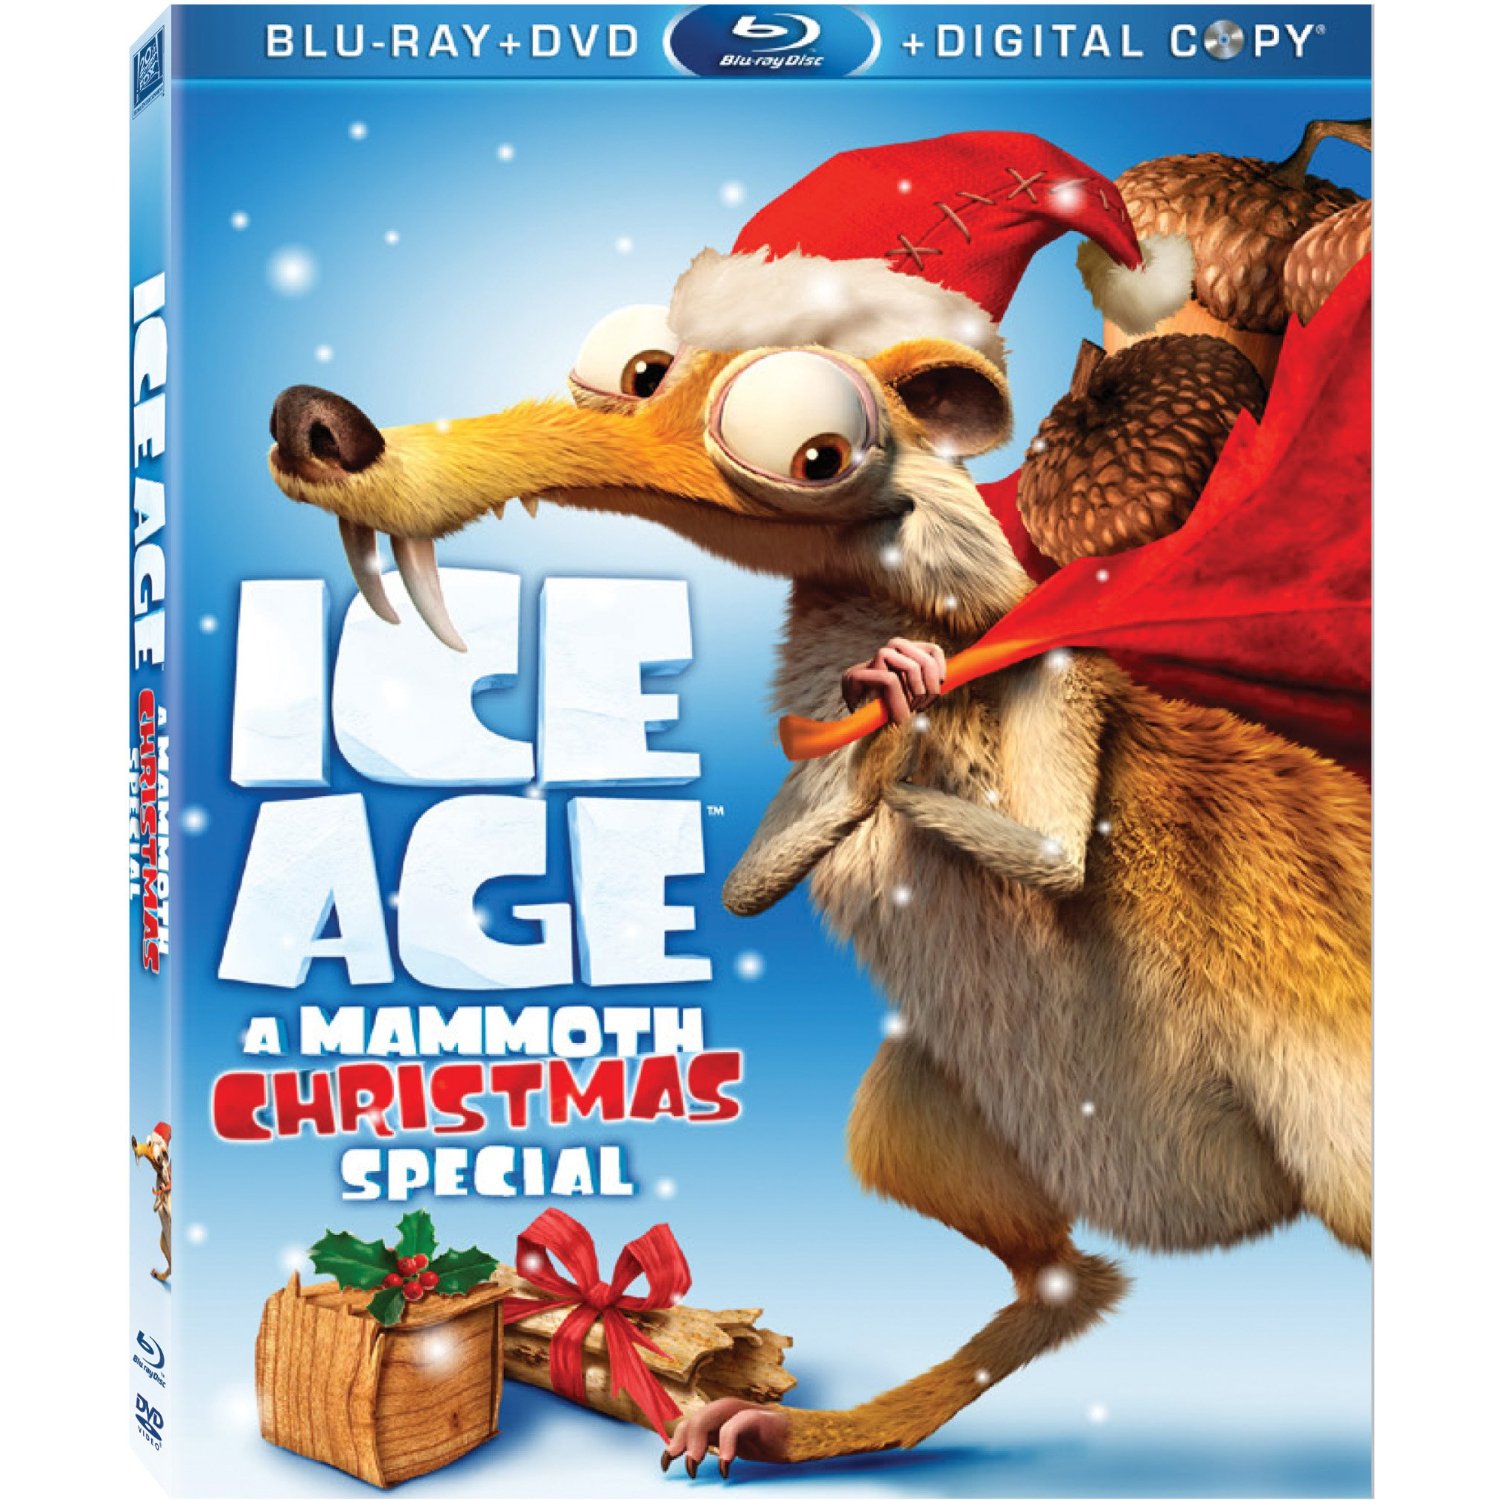 Ice Age: A Mammoth Christmas Backgrounds, Compatible - PC, Mobile, Gadgets| 1500x1500 px